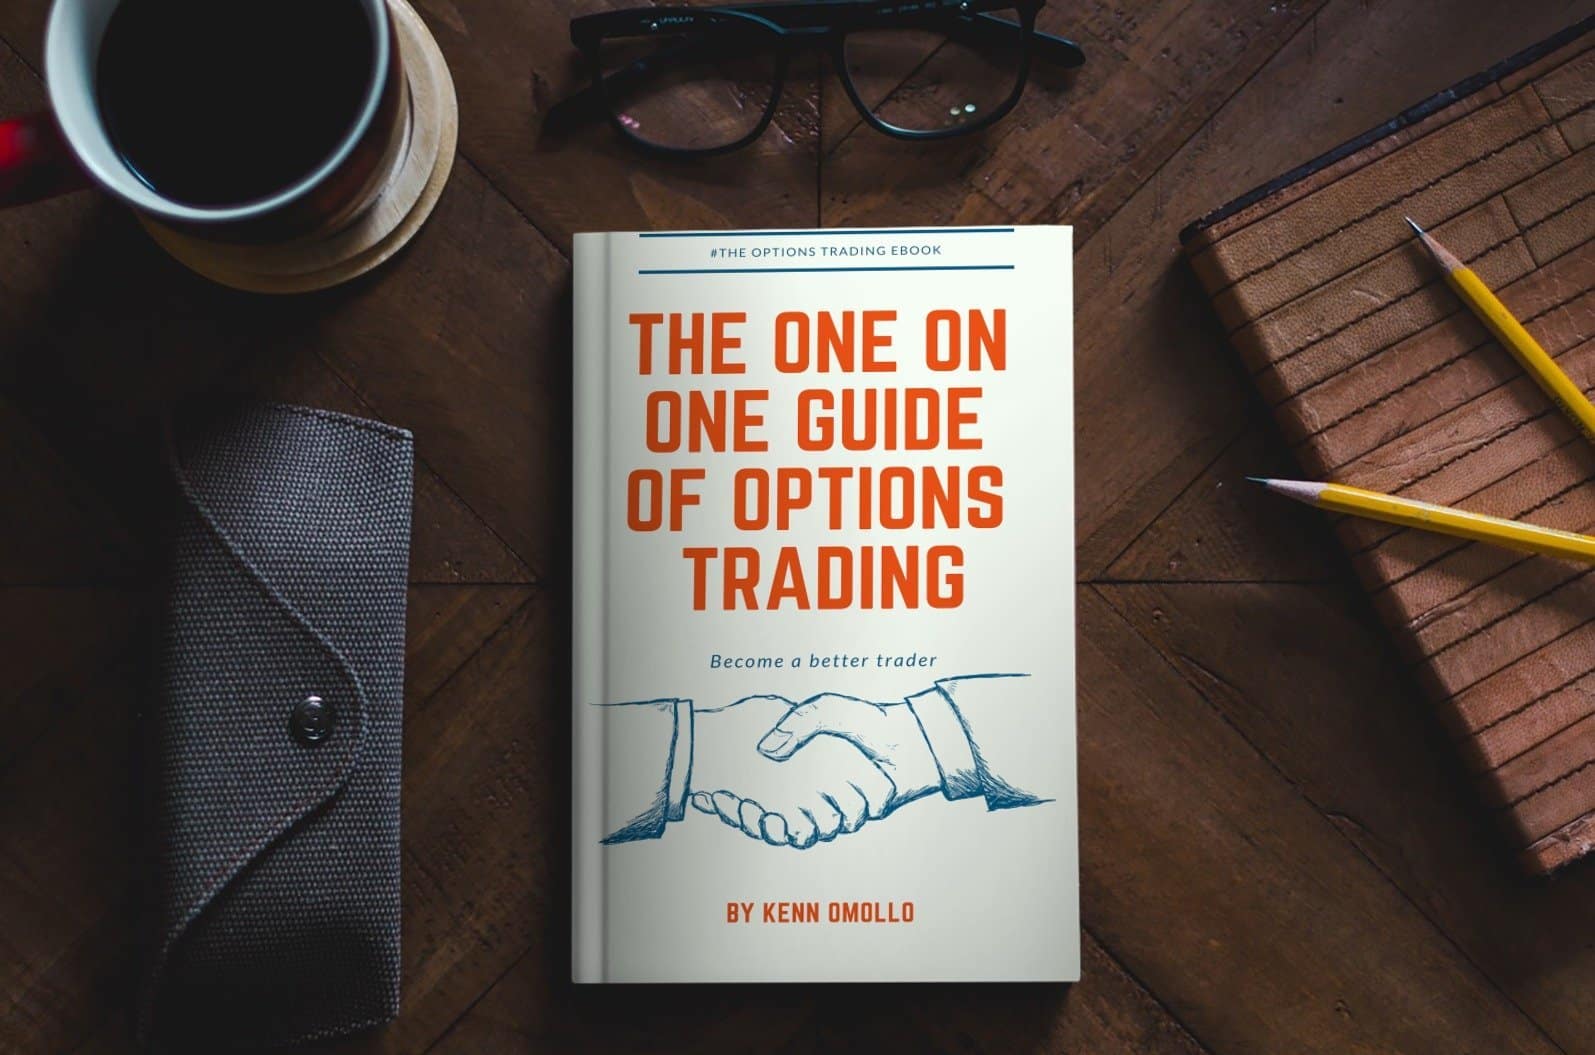 The one on one guide of options trading